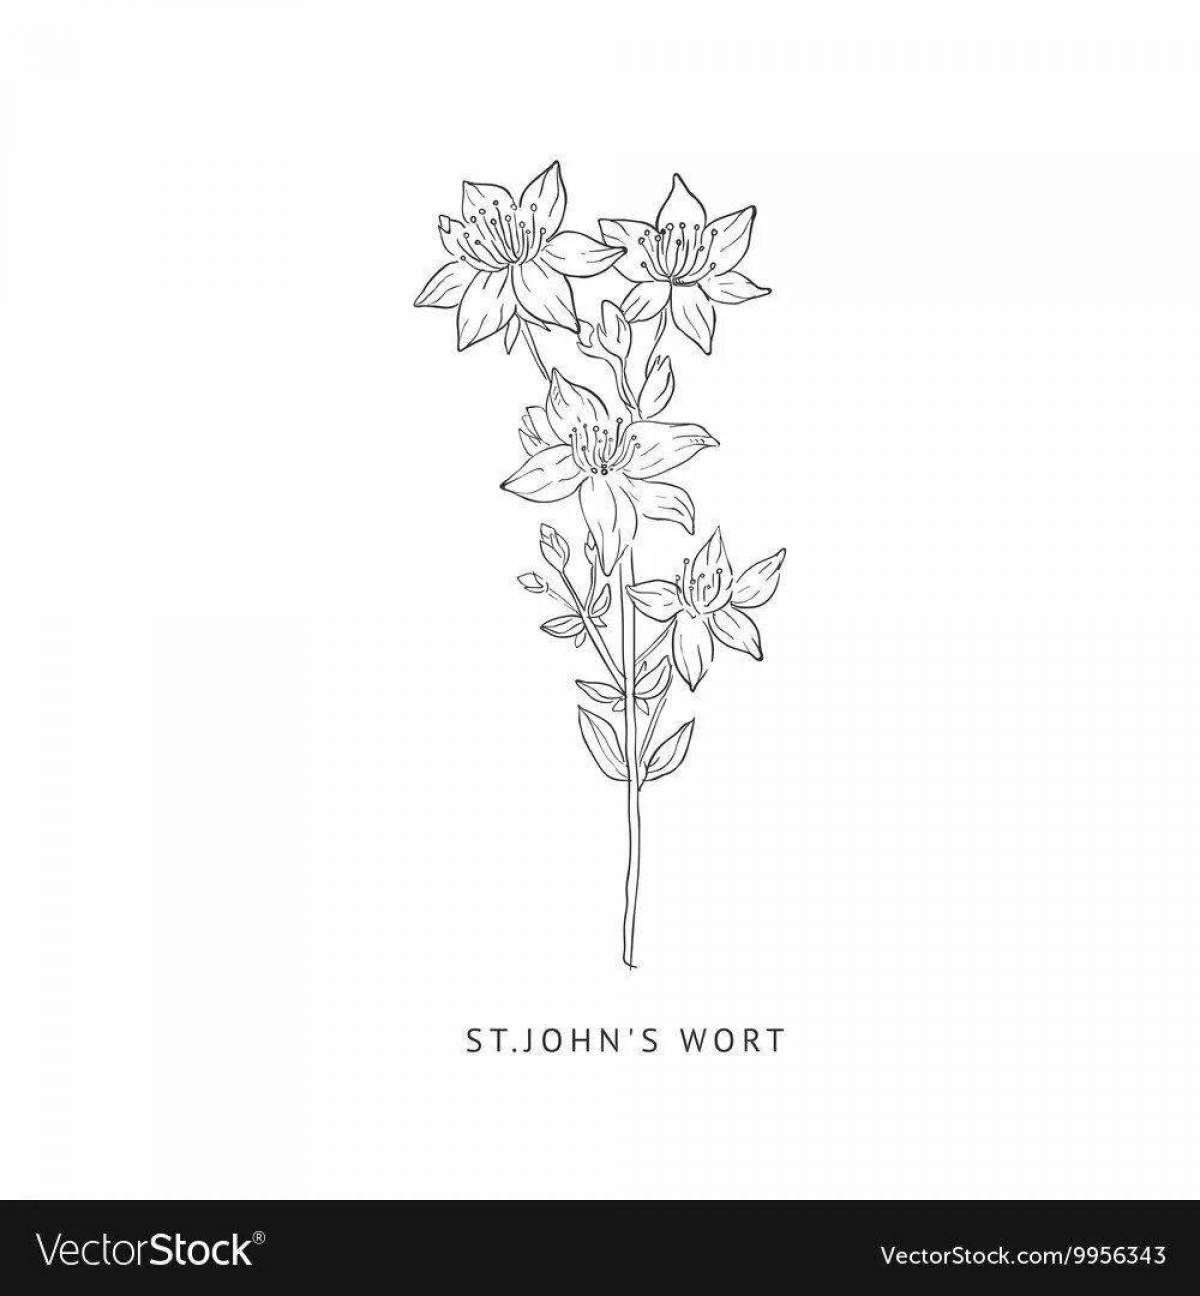 Glitter St. John's wort coloring page